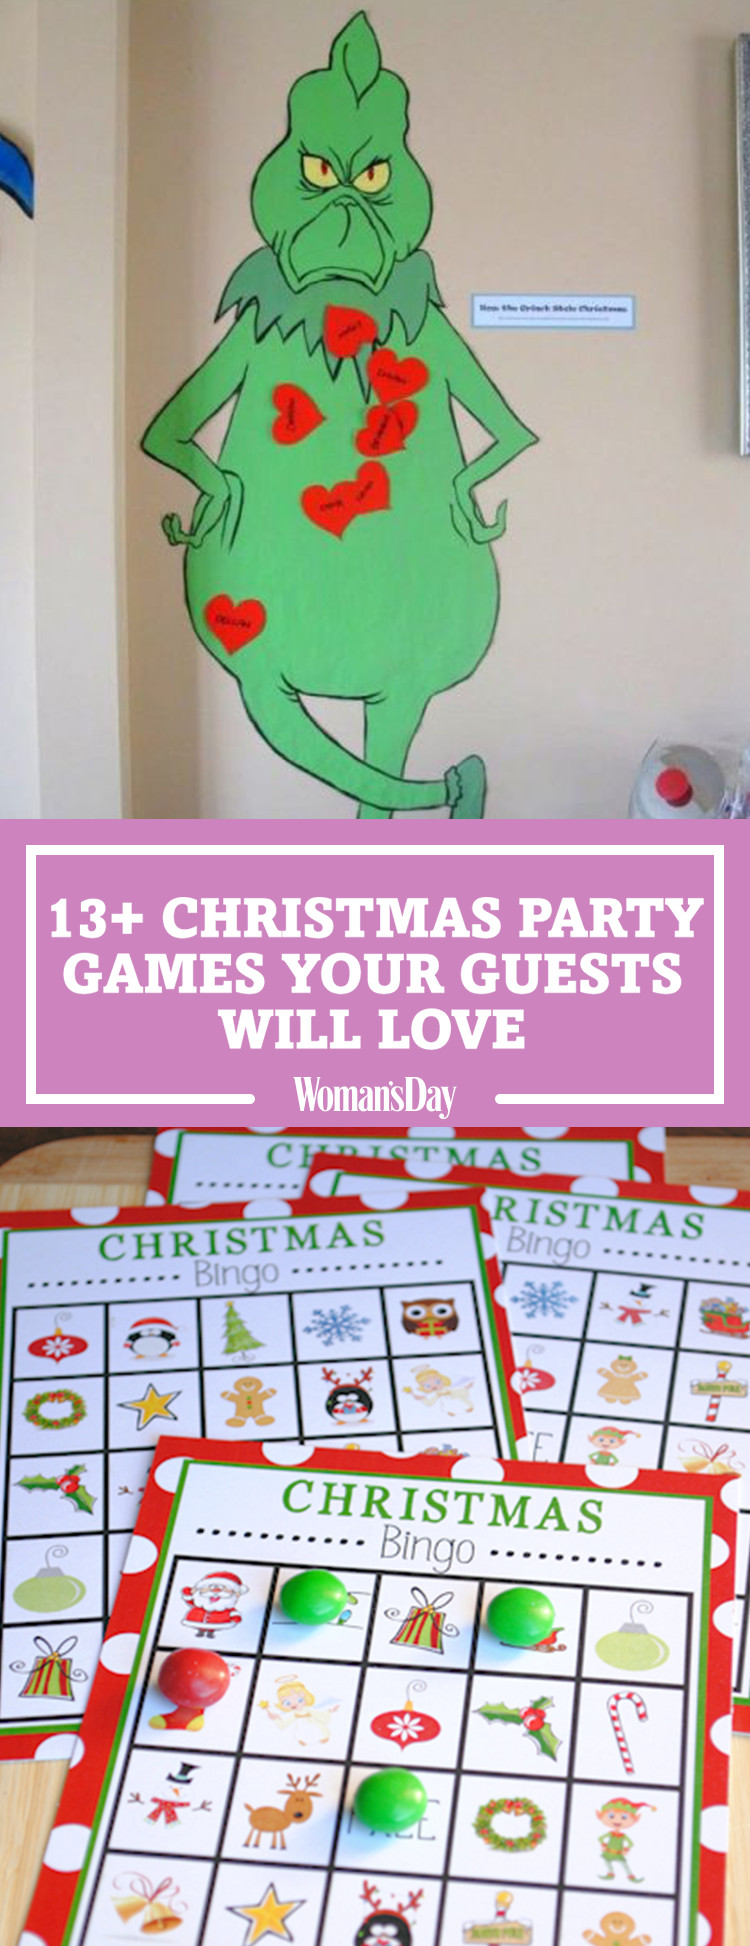 Christmas Party Game Ideas
 17 Fun Christmas Party Games for Kids DIY Holiday Party